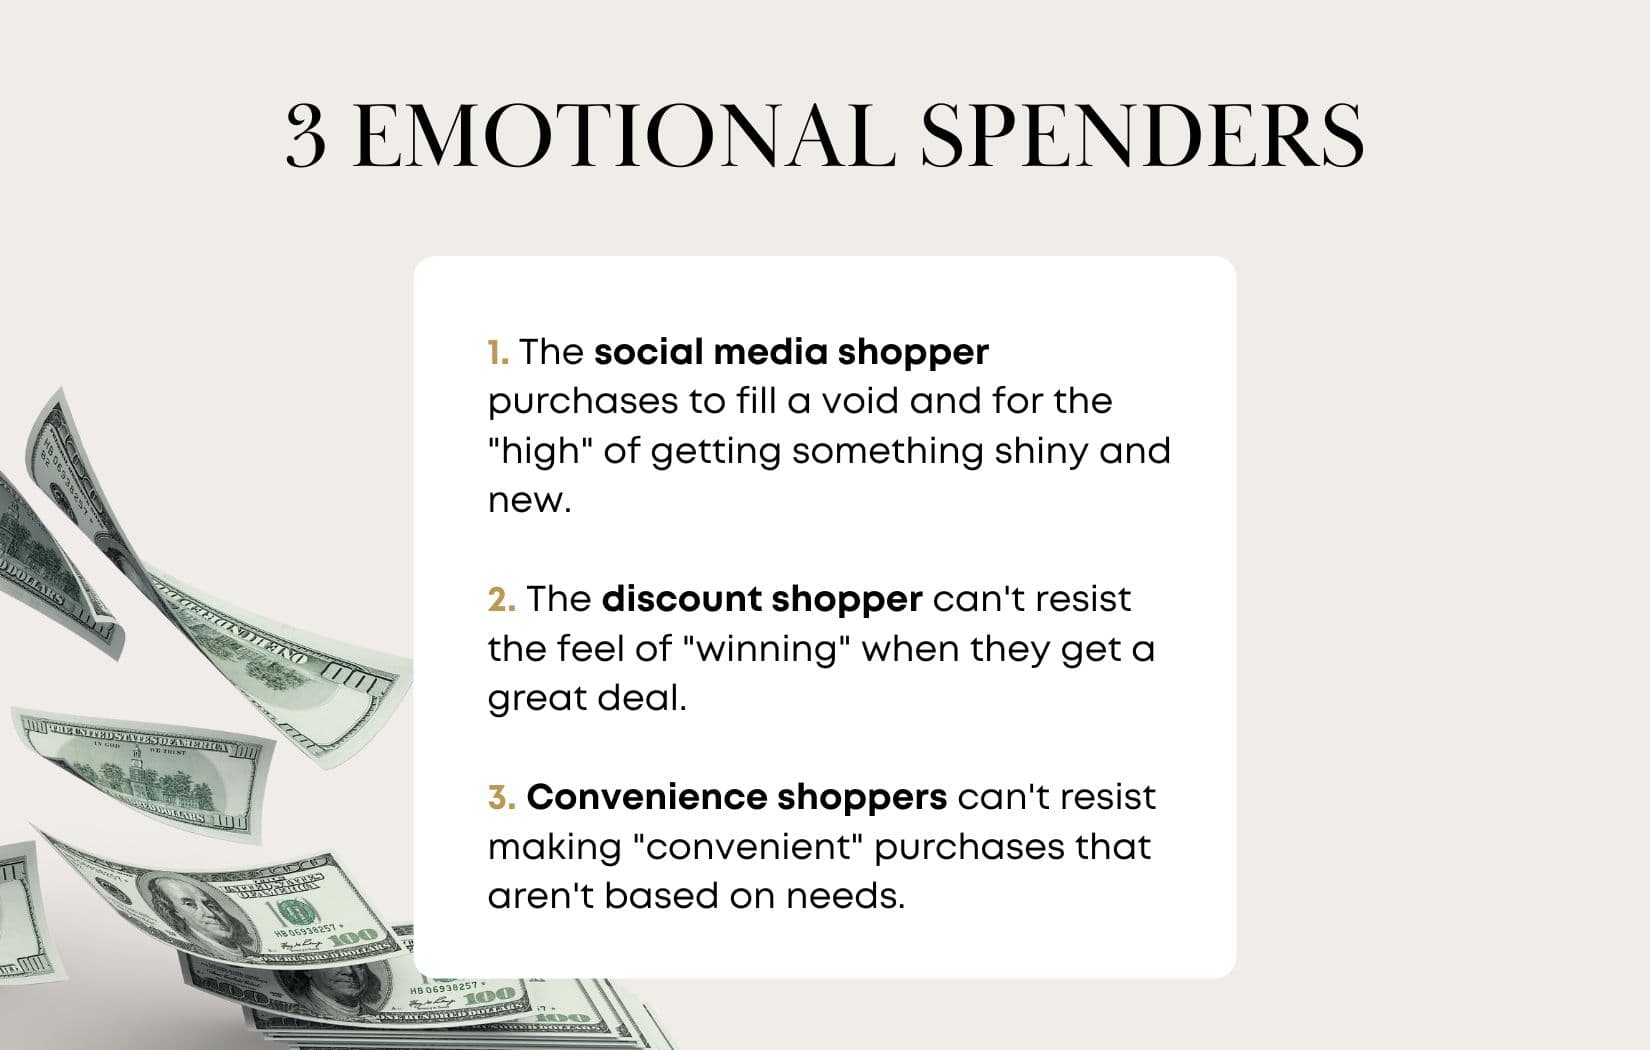 There are three main situations where people overspend, all based on emotions